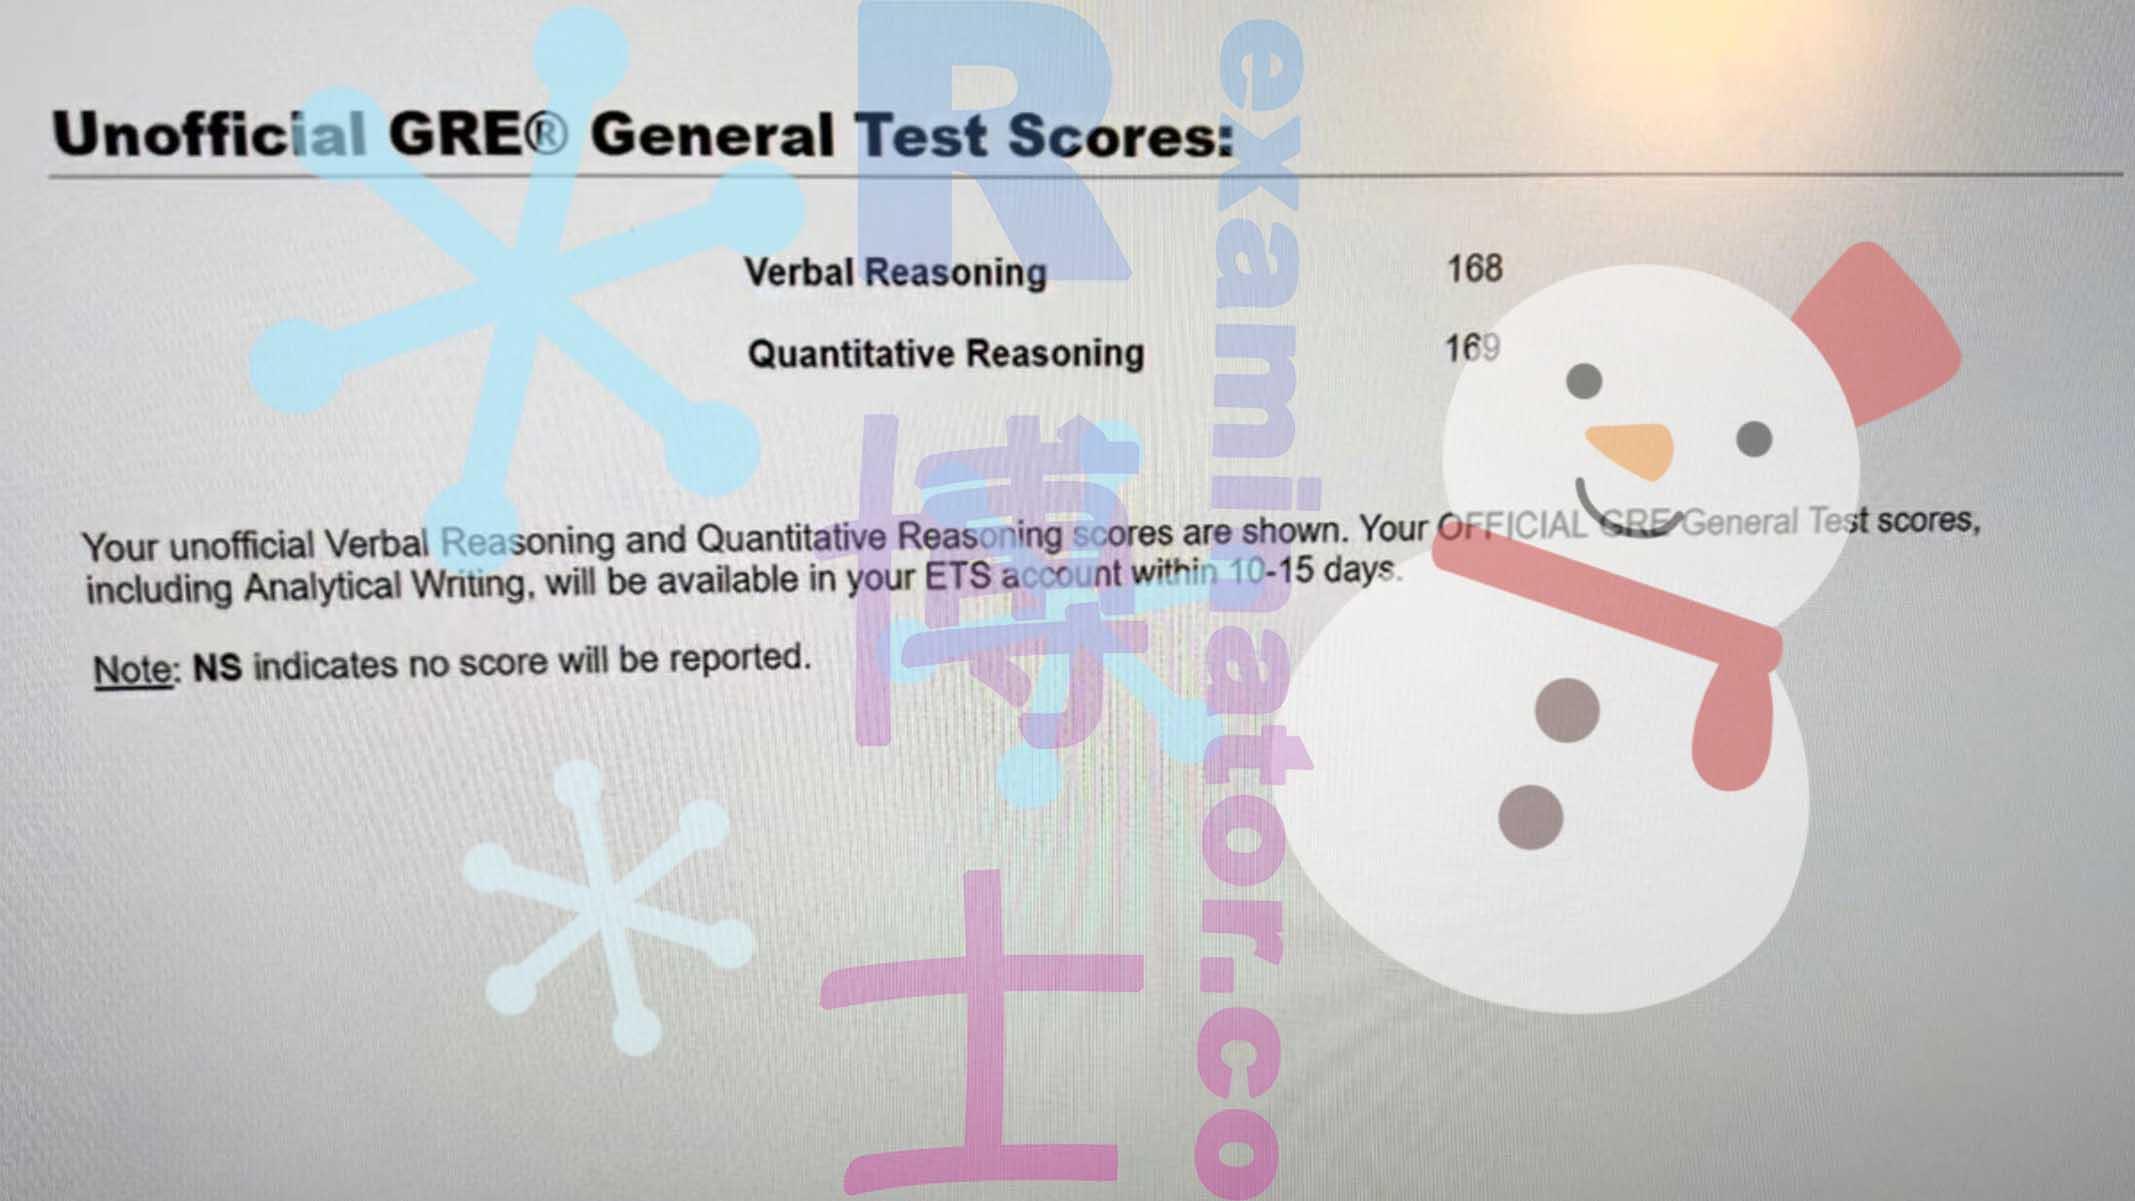 score image for GRE Proxy Testing success story #260